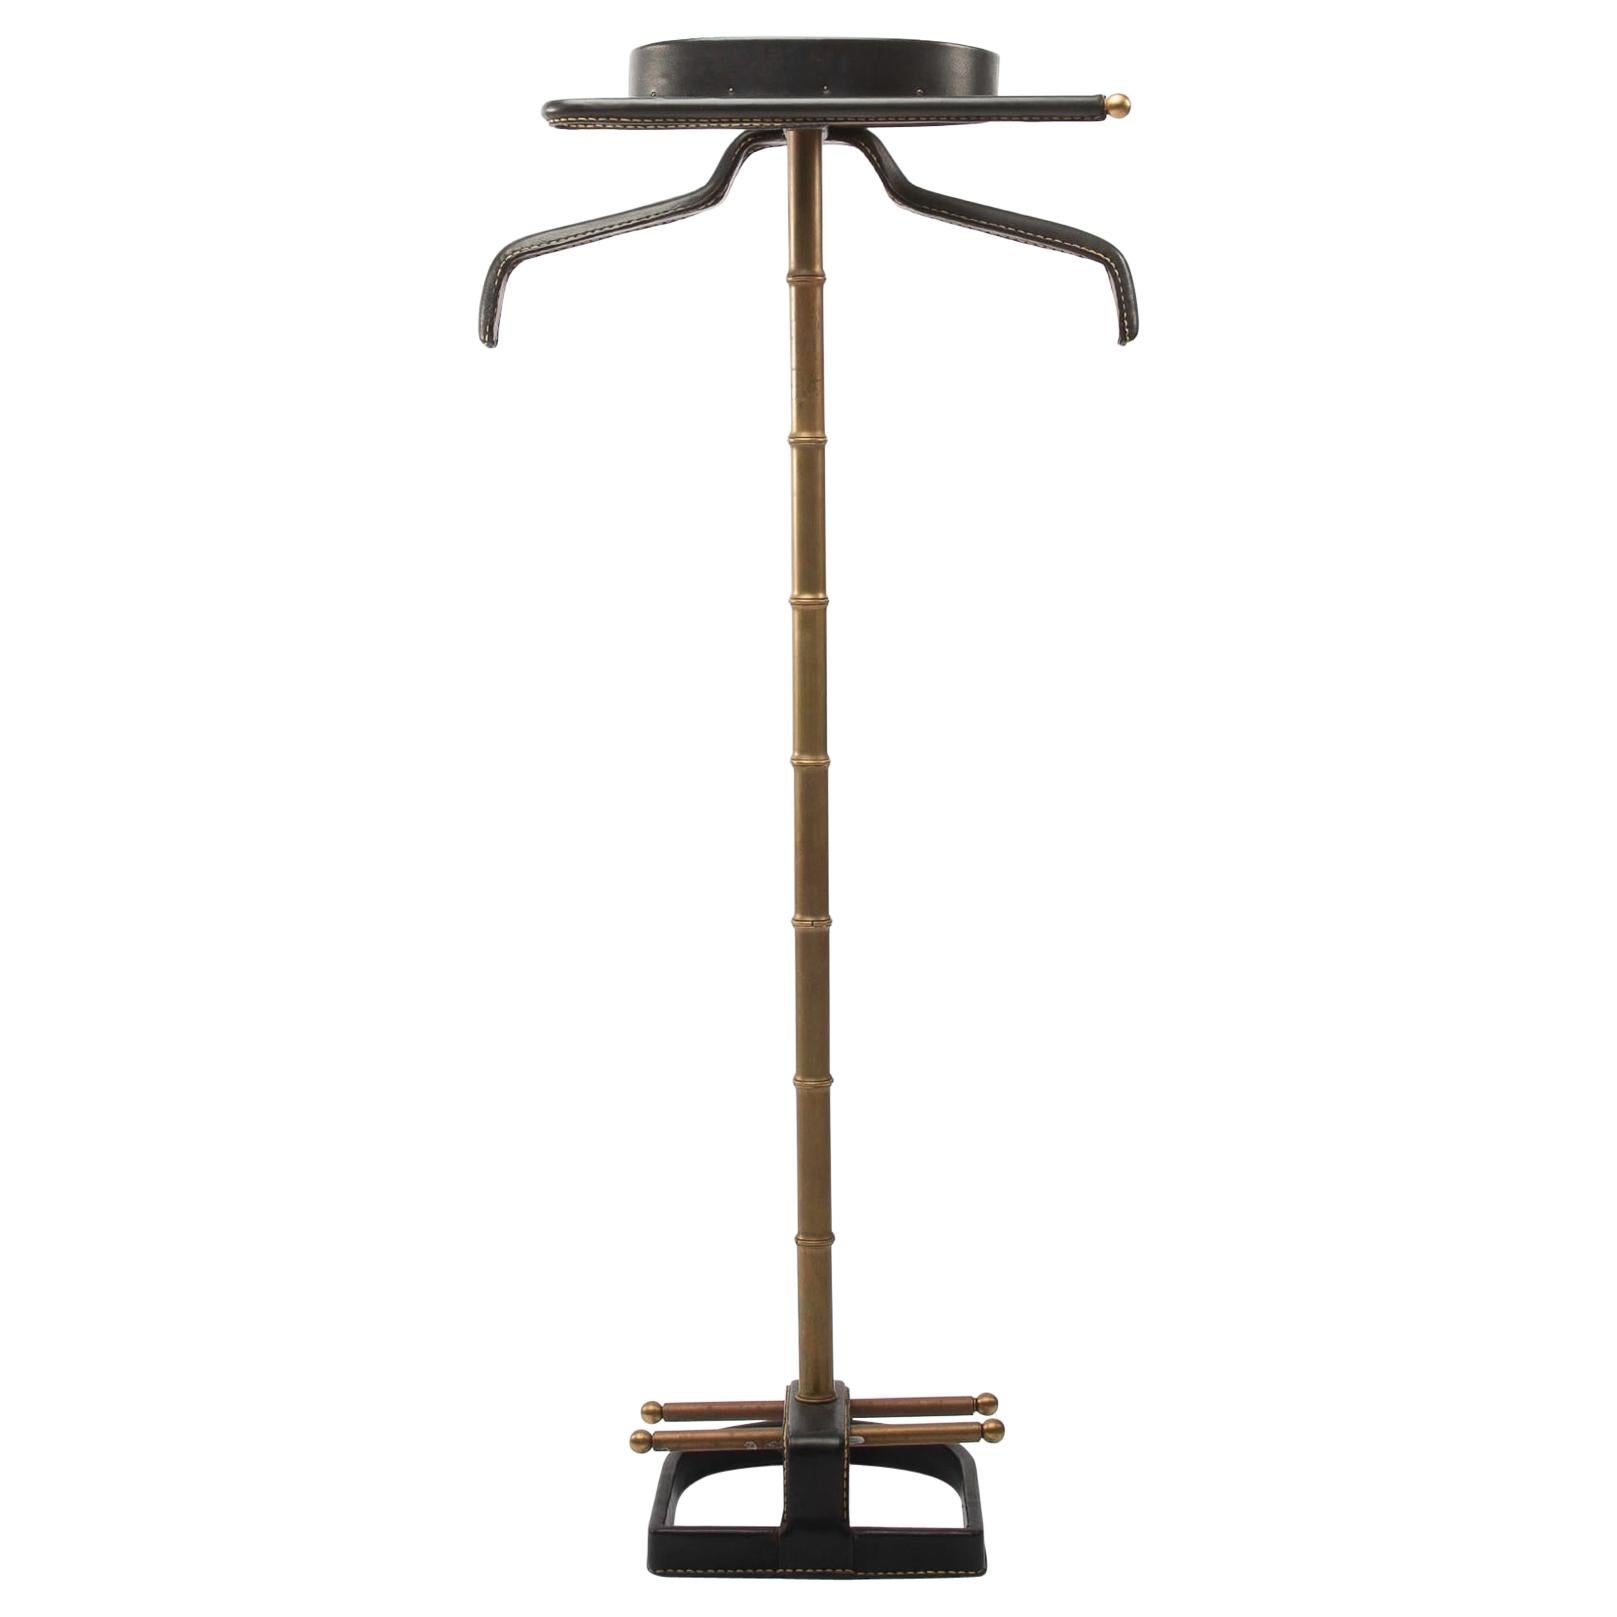 French Midcentury Valet, Jacques Adnet, Steel, Black Leather, Brass 